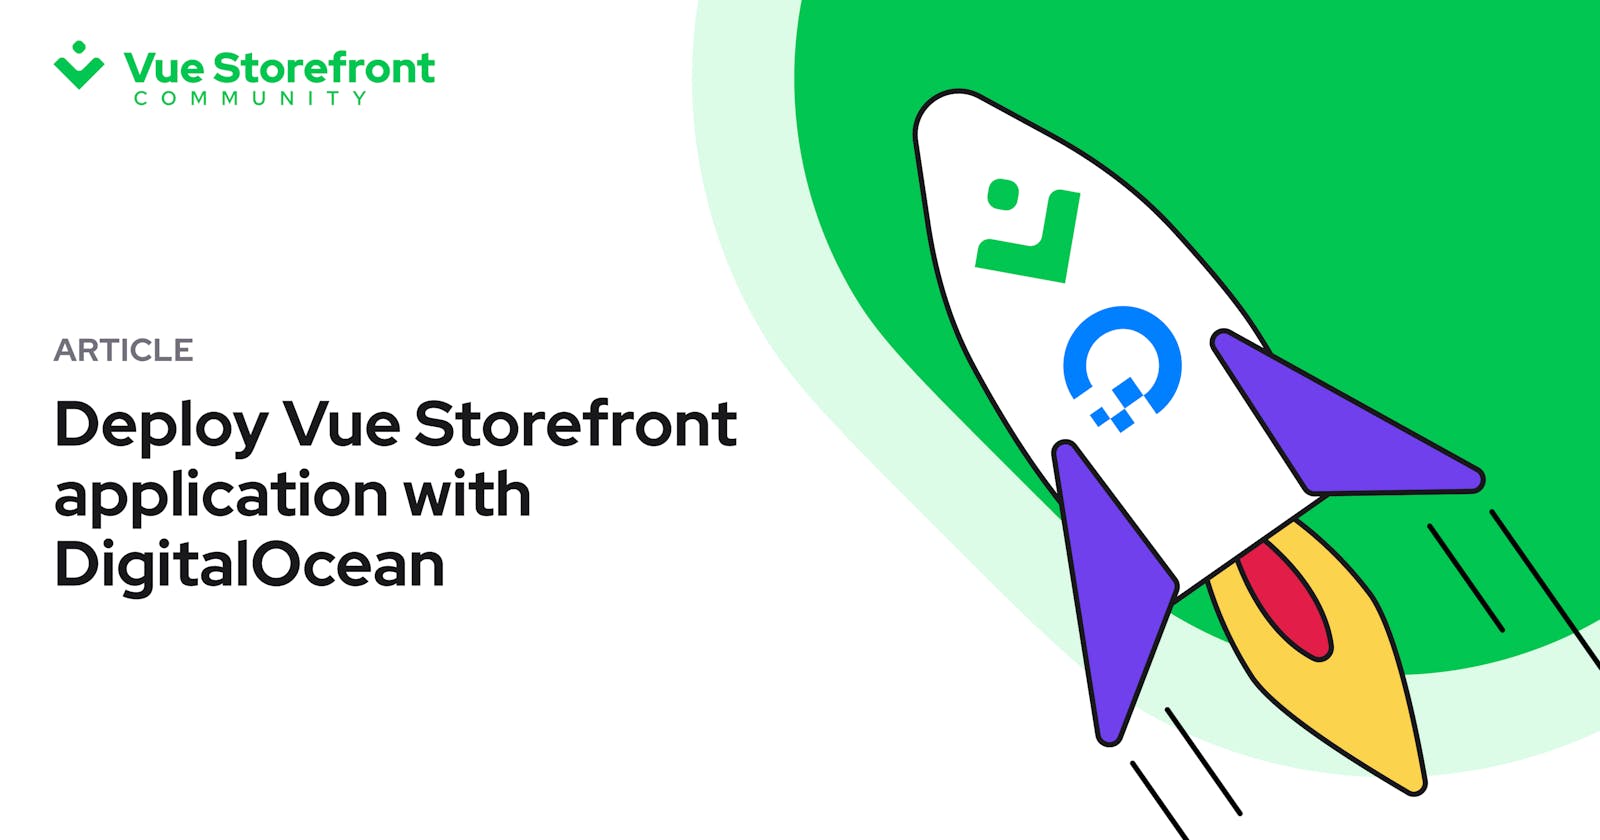 A Step-by-Step Guide to Deploying Vue Storefront Application on the DigitalOcean App Platform